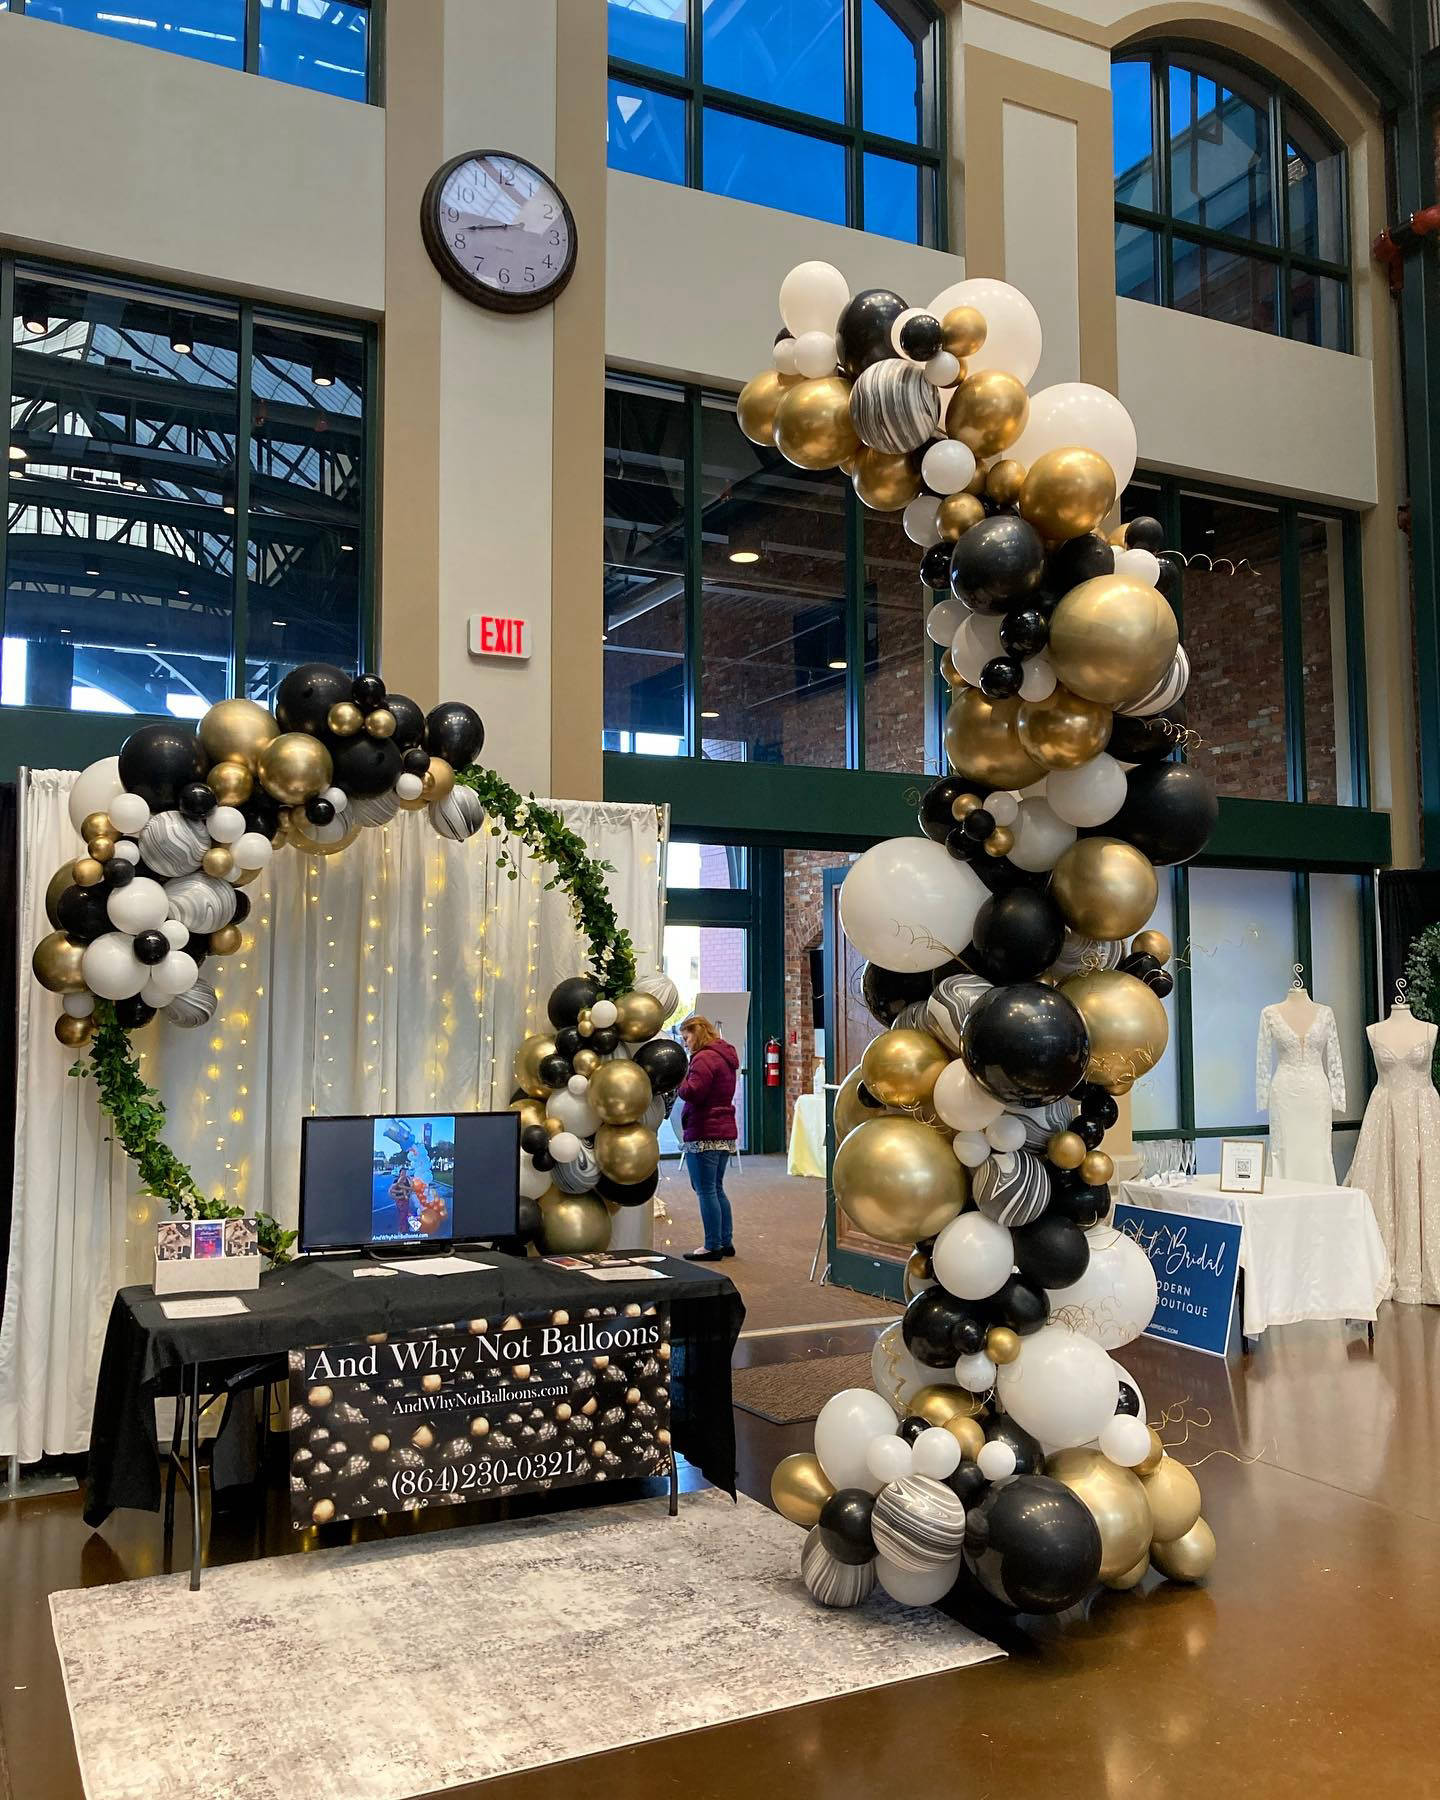 And Why Not Balloon Wedding expo pic greer sc